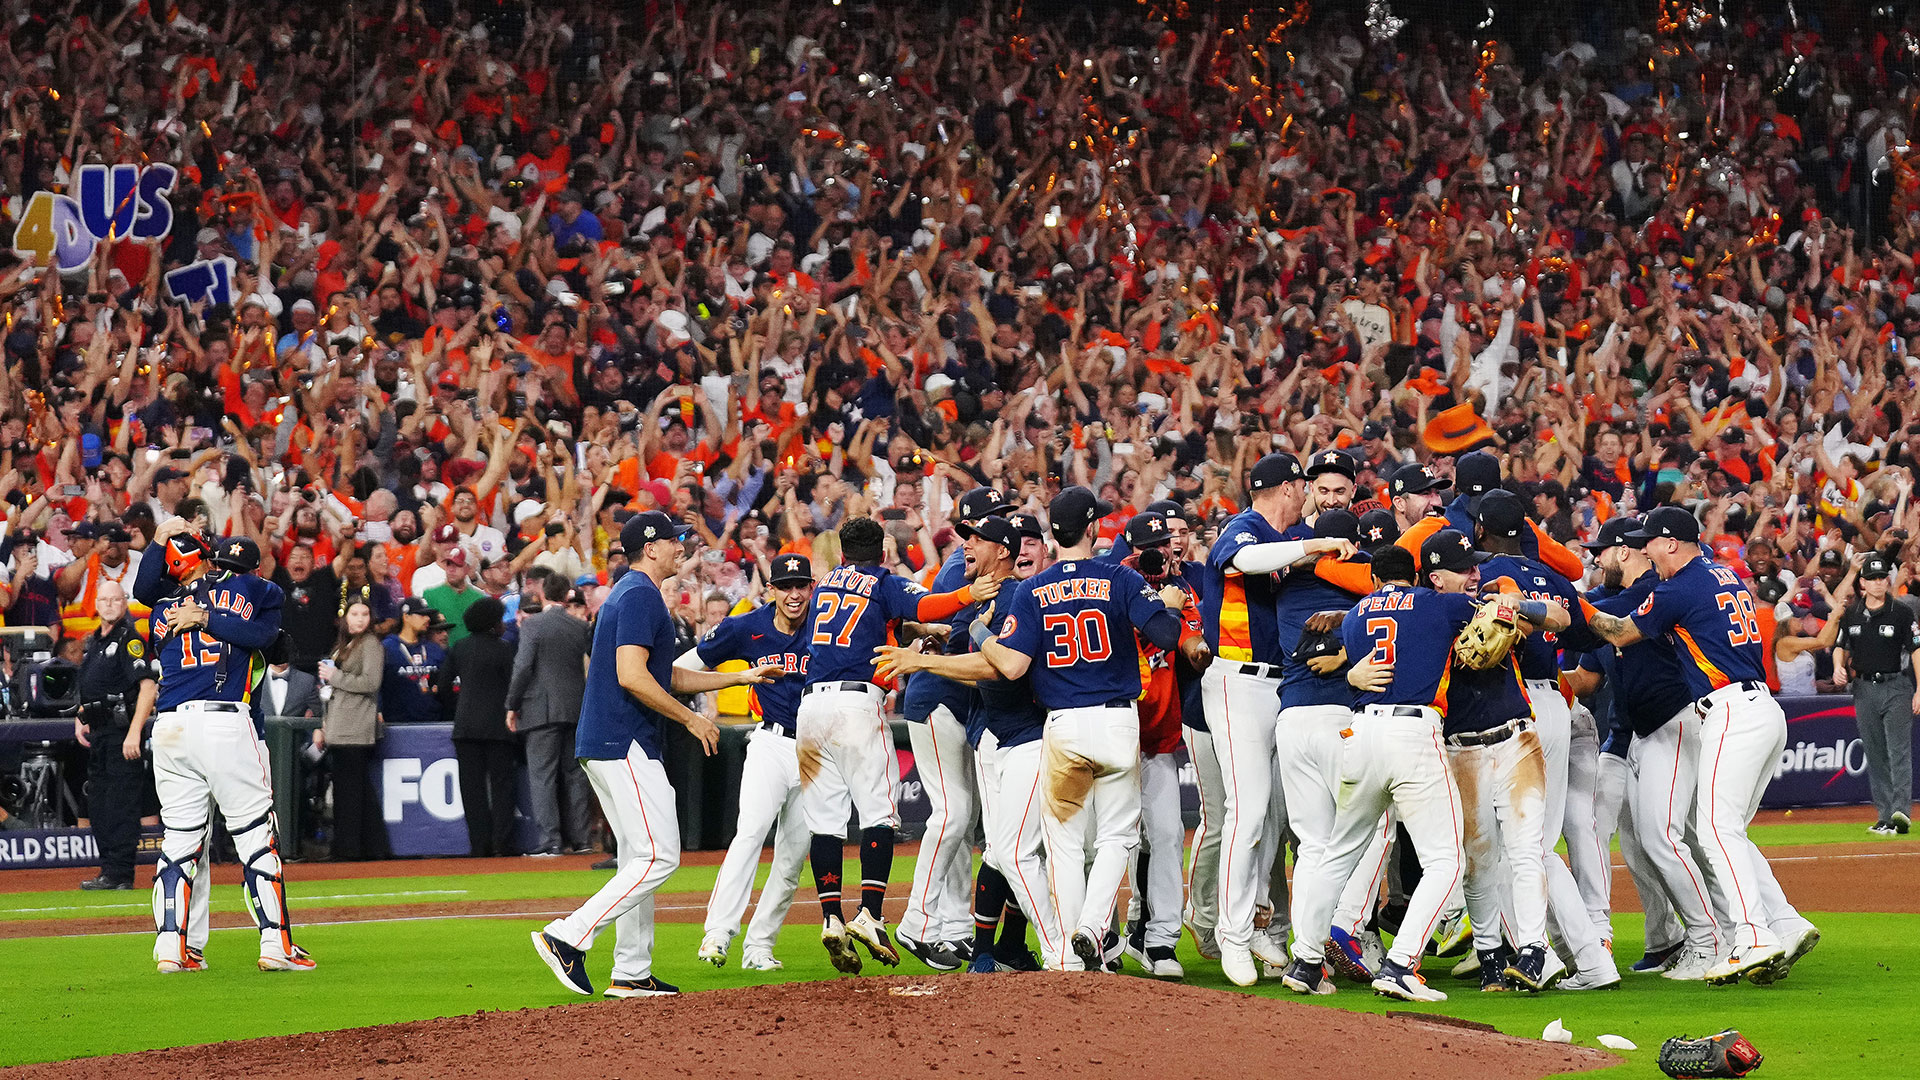 Infield Fly: The Houston Astros are the World Champs